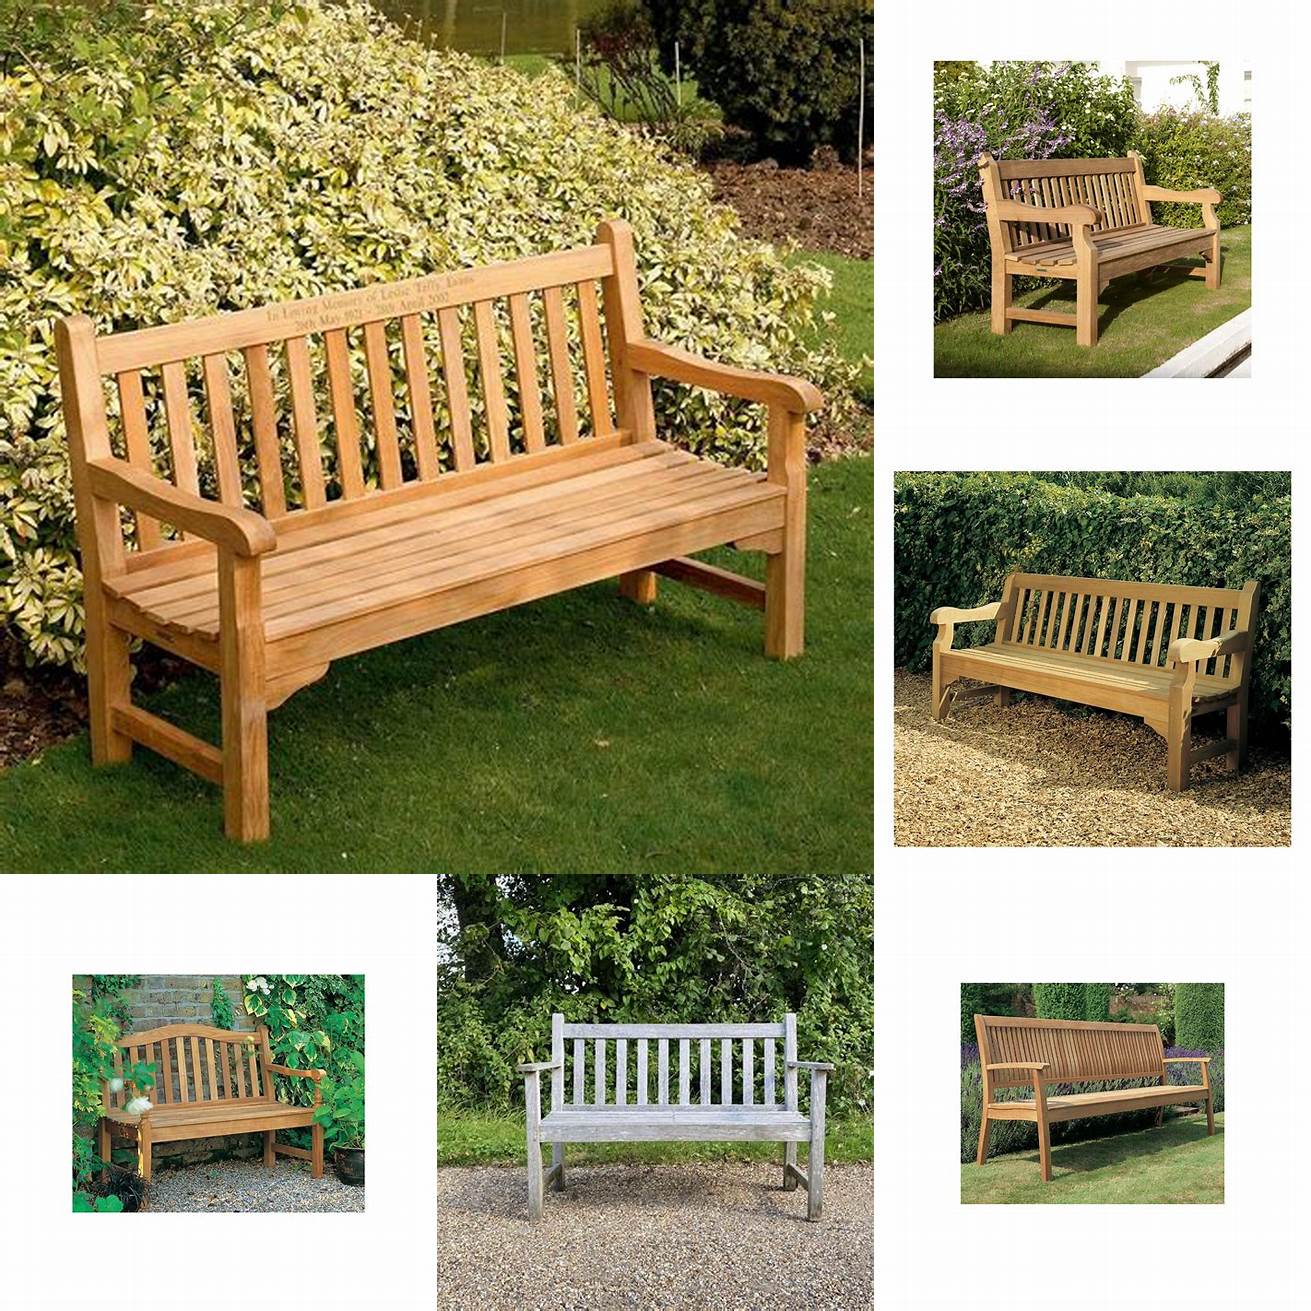 Barlow Tyrie Bench in a Garden